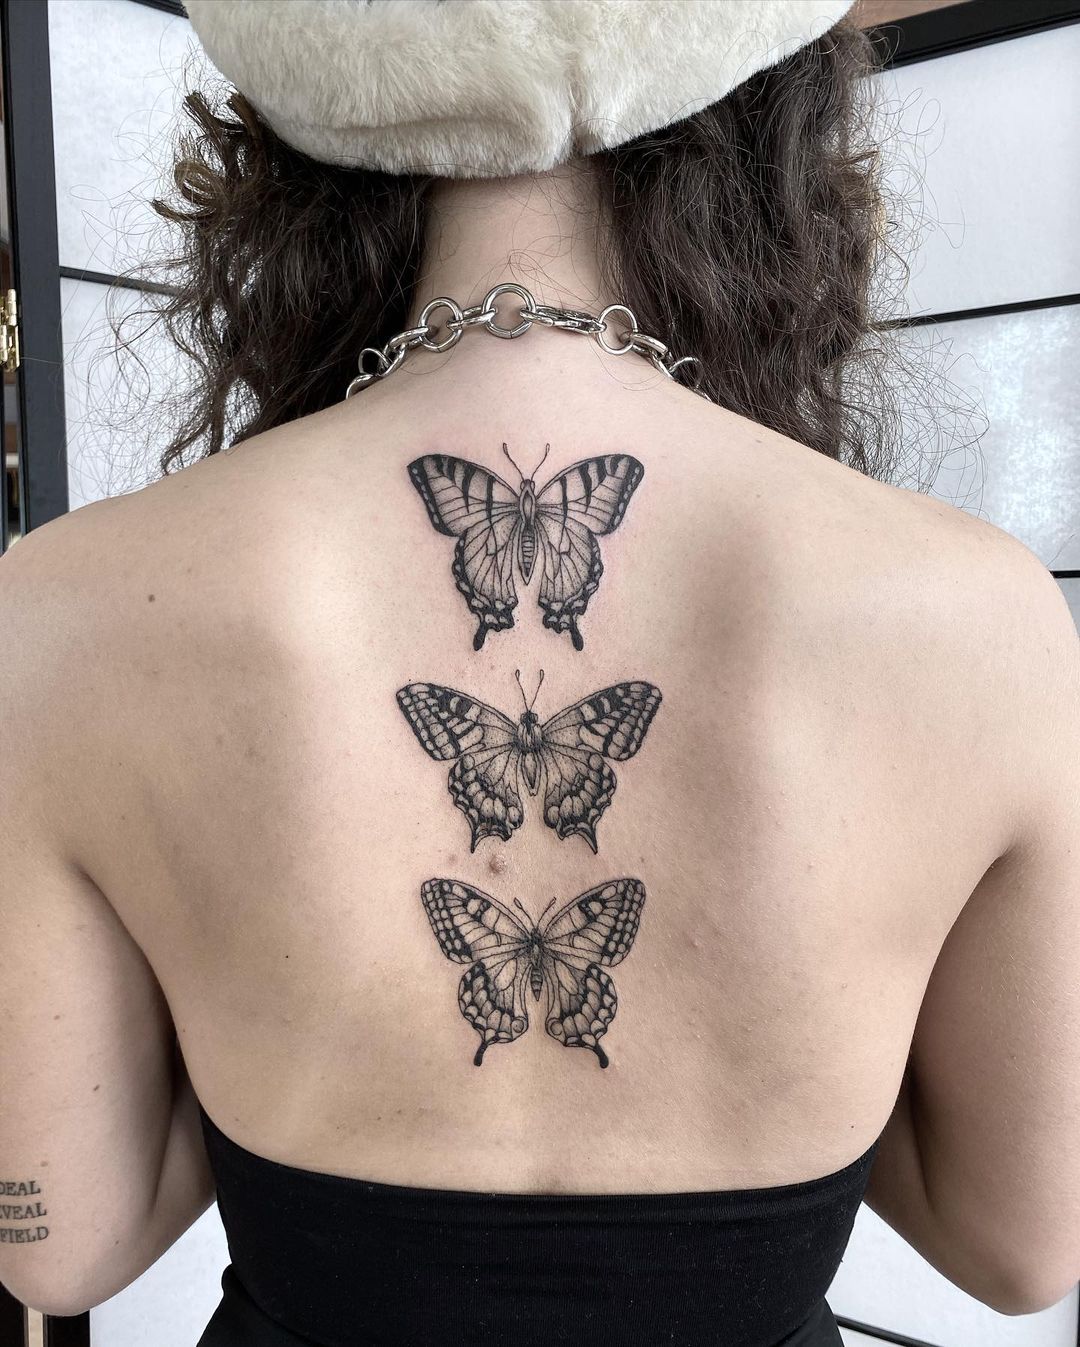 30+ Best Butterfly Tattoos Design You’ll Love To Get Next. Butterfly Tattoos on back